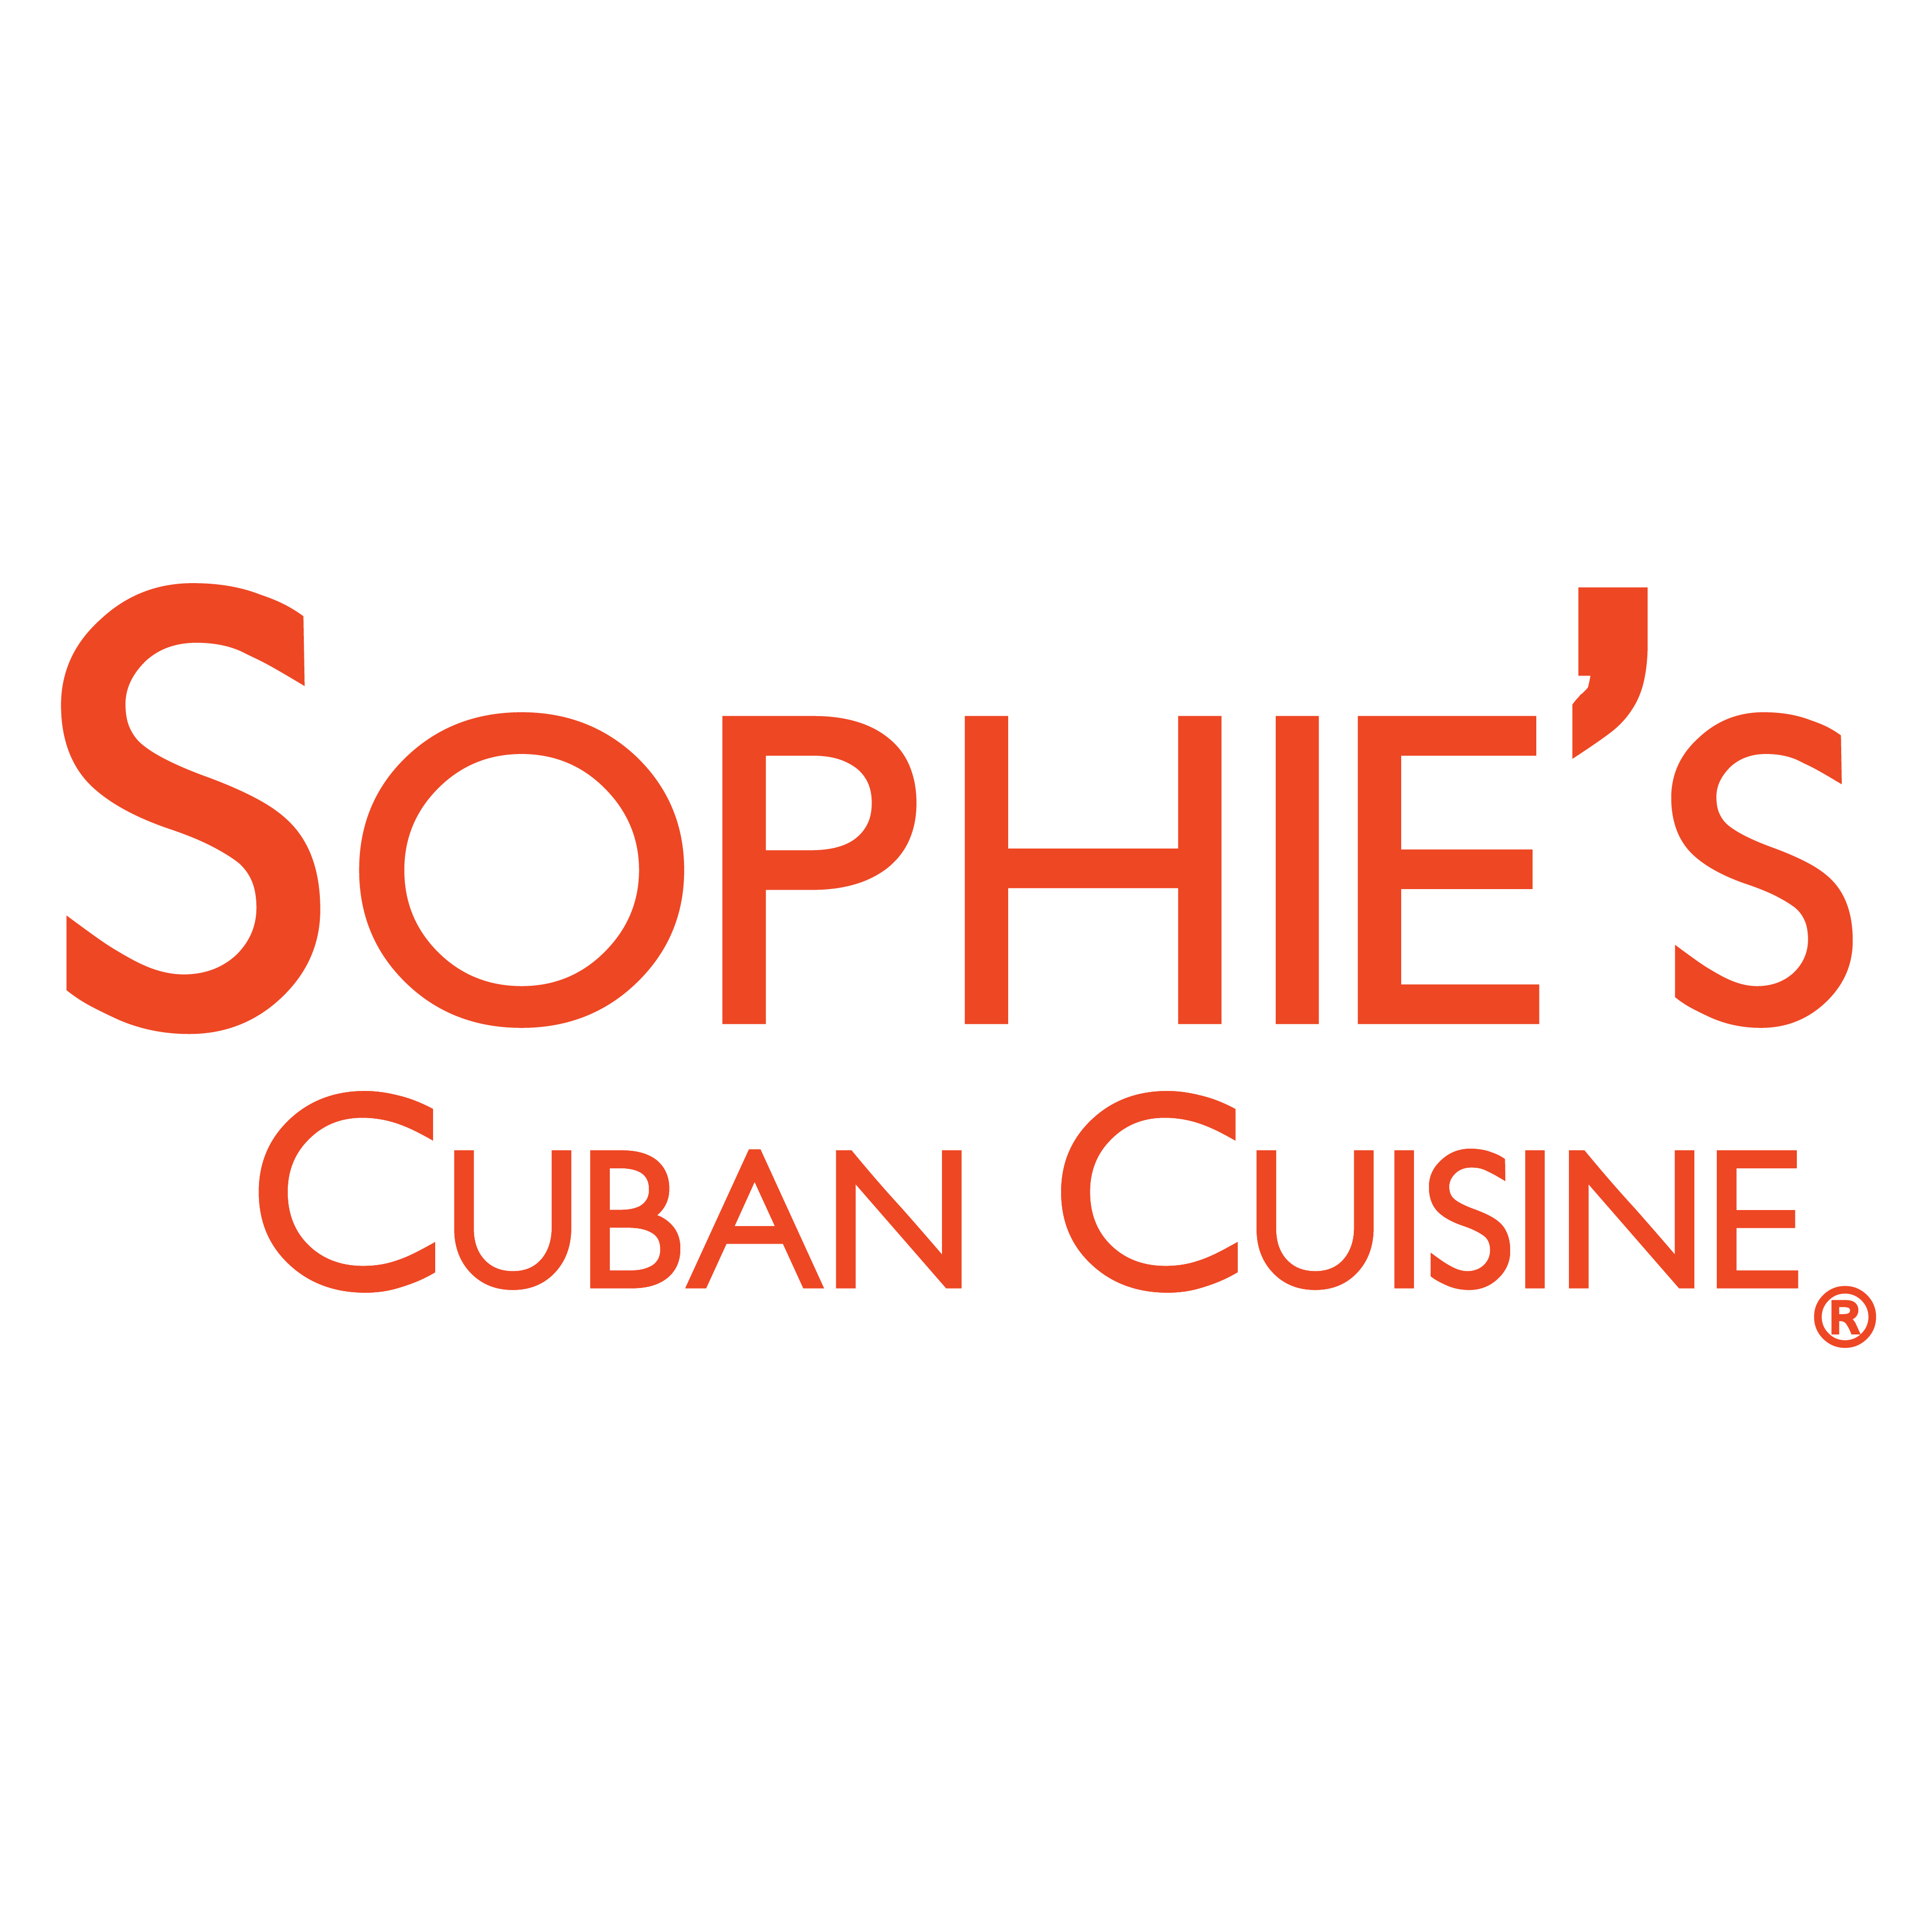 Sophie's Cuban Cuisine - Midtown East - New York, NY 10017 - (212)922-3576 | ShowMeLocal.com